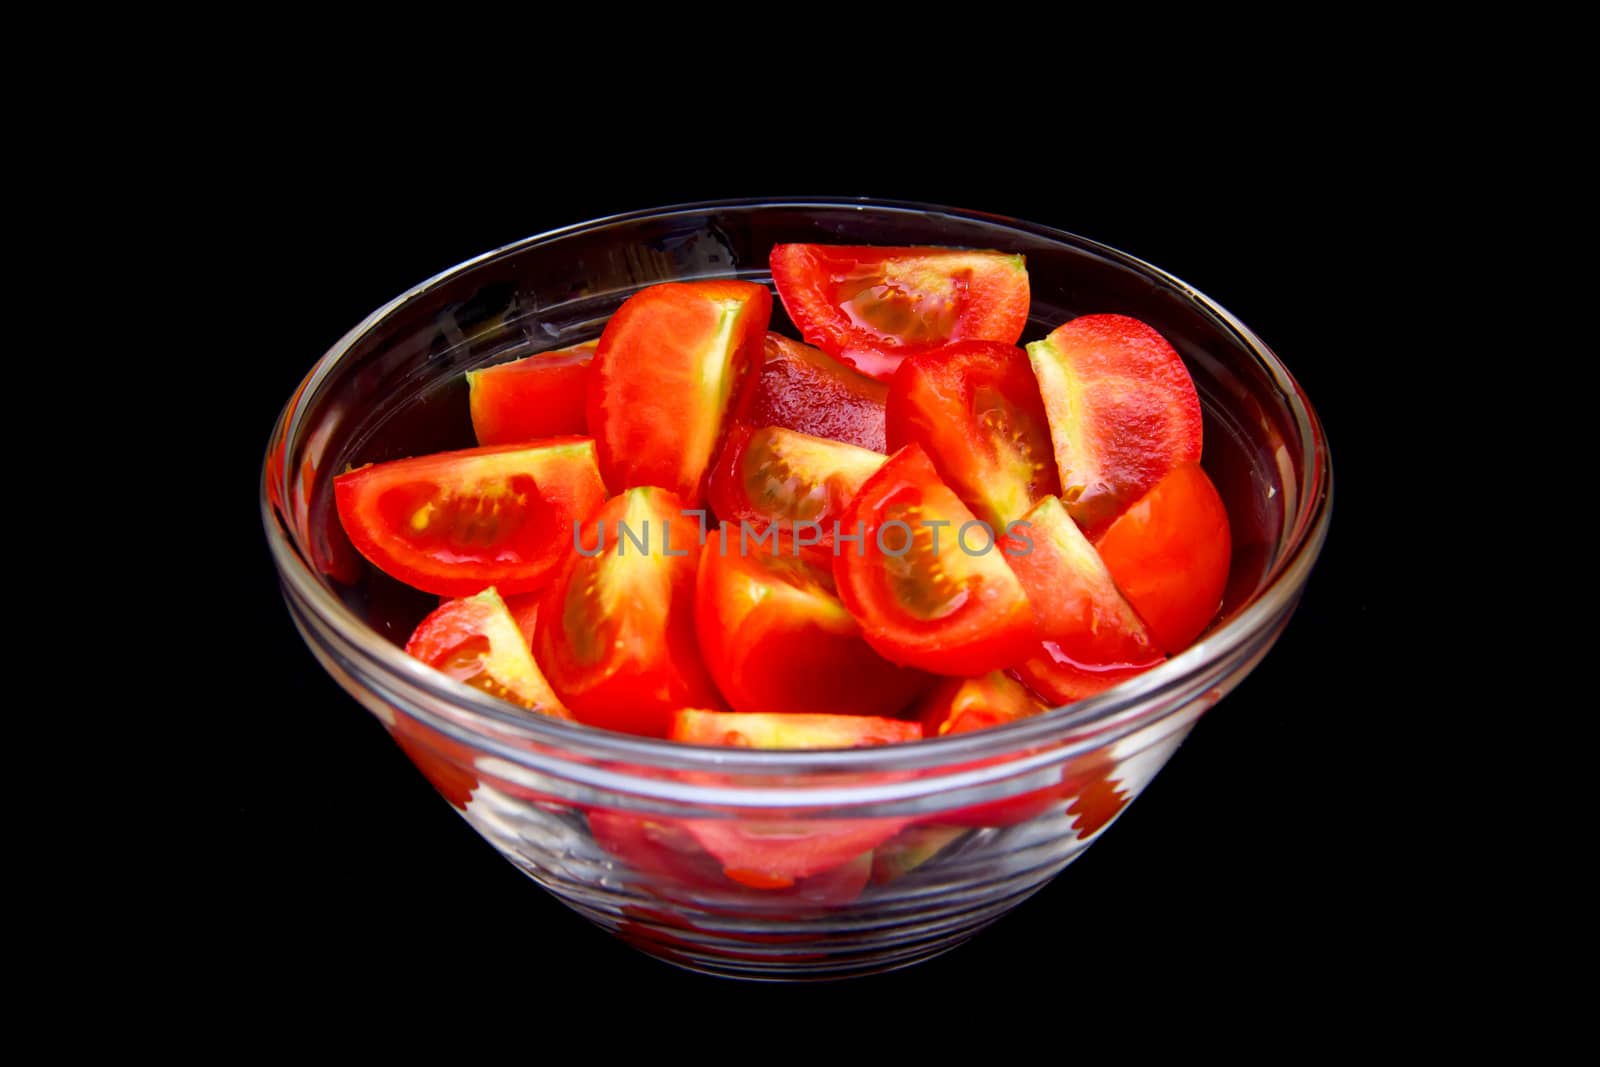 Bowl of tomato wedges on a black background